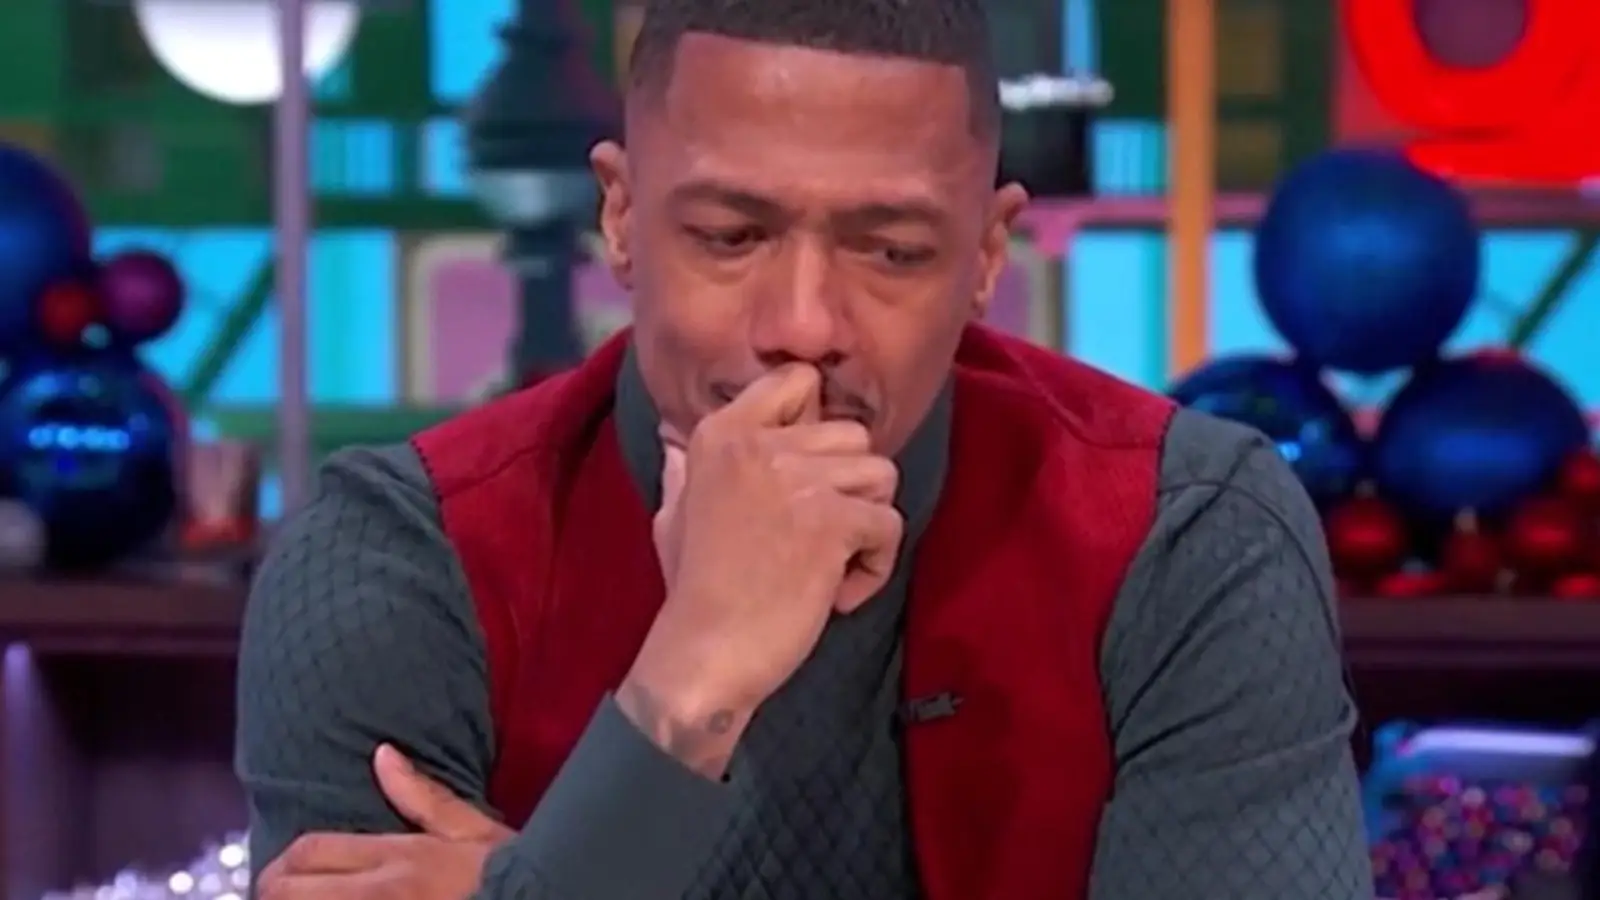 Nick Cannon, Mariah Carey’s ex, breaks down in tears when talking about the death of his five-month-old son